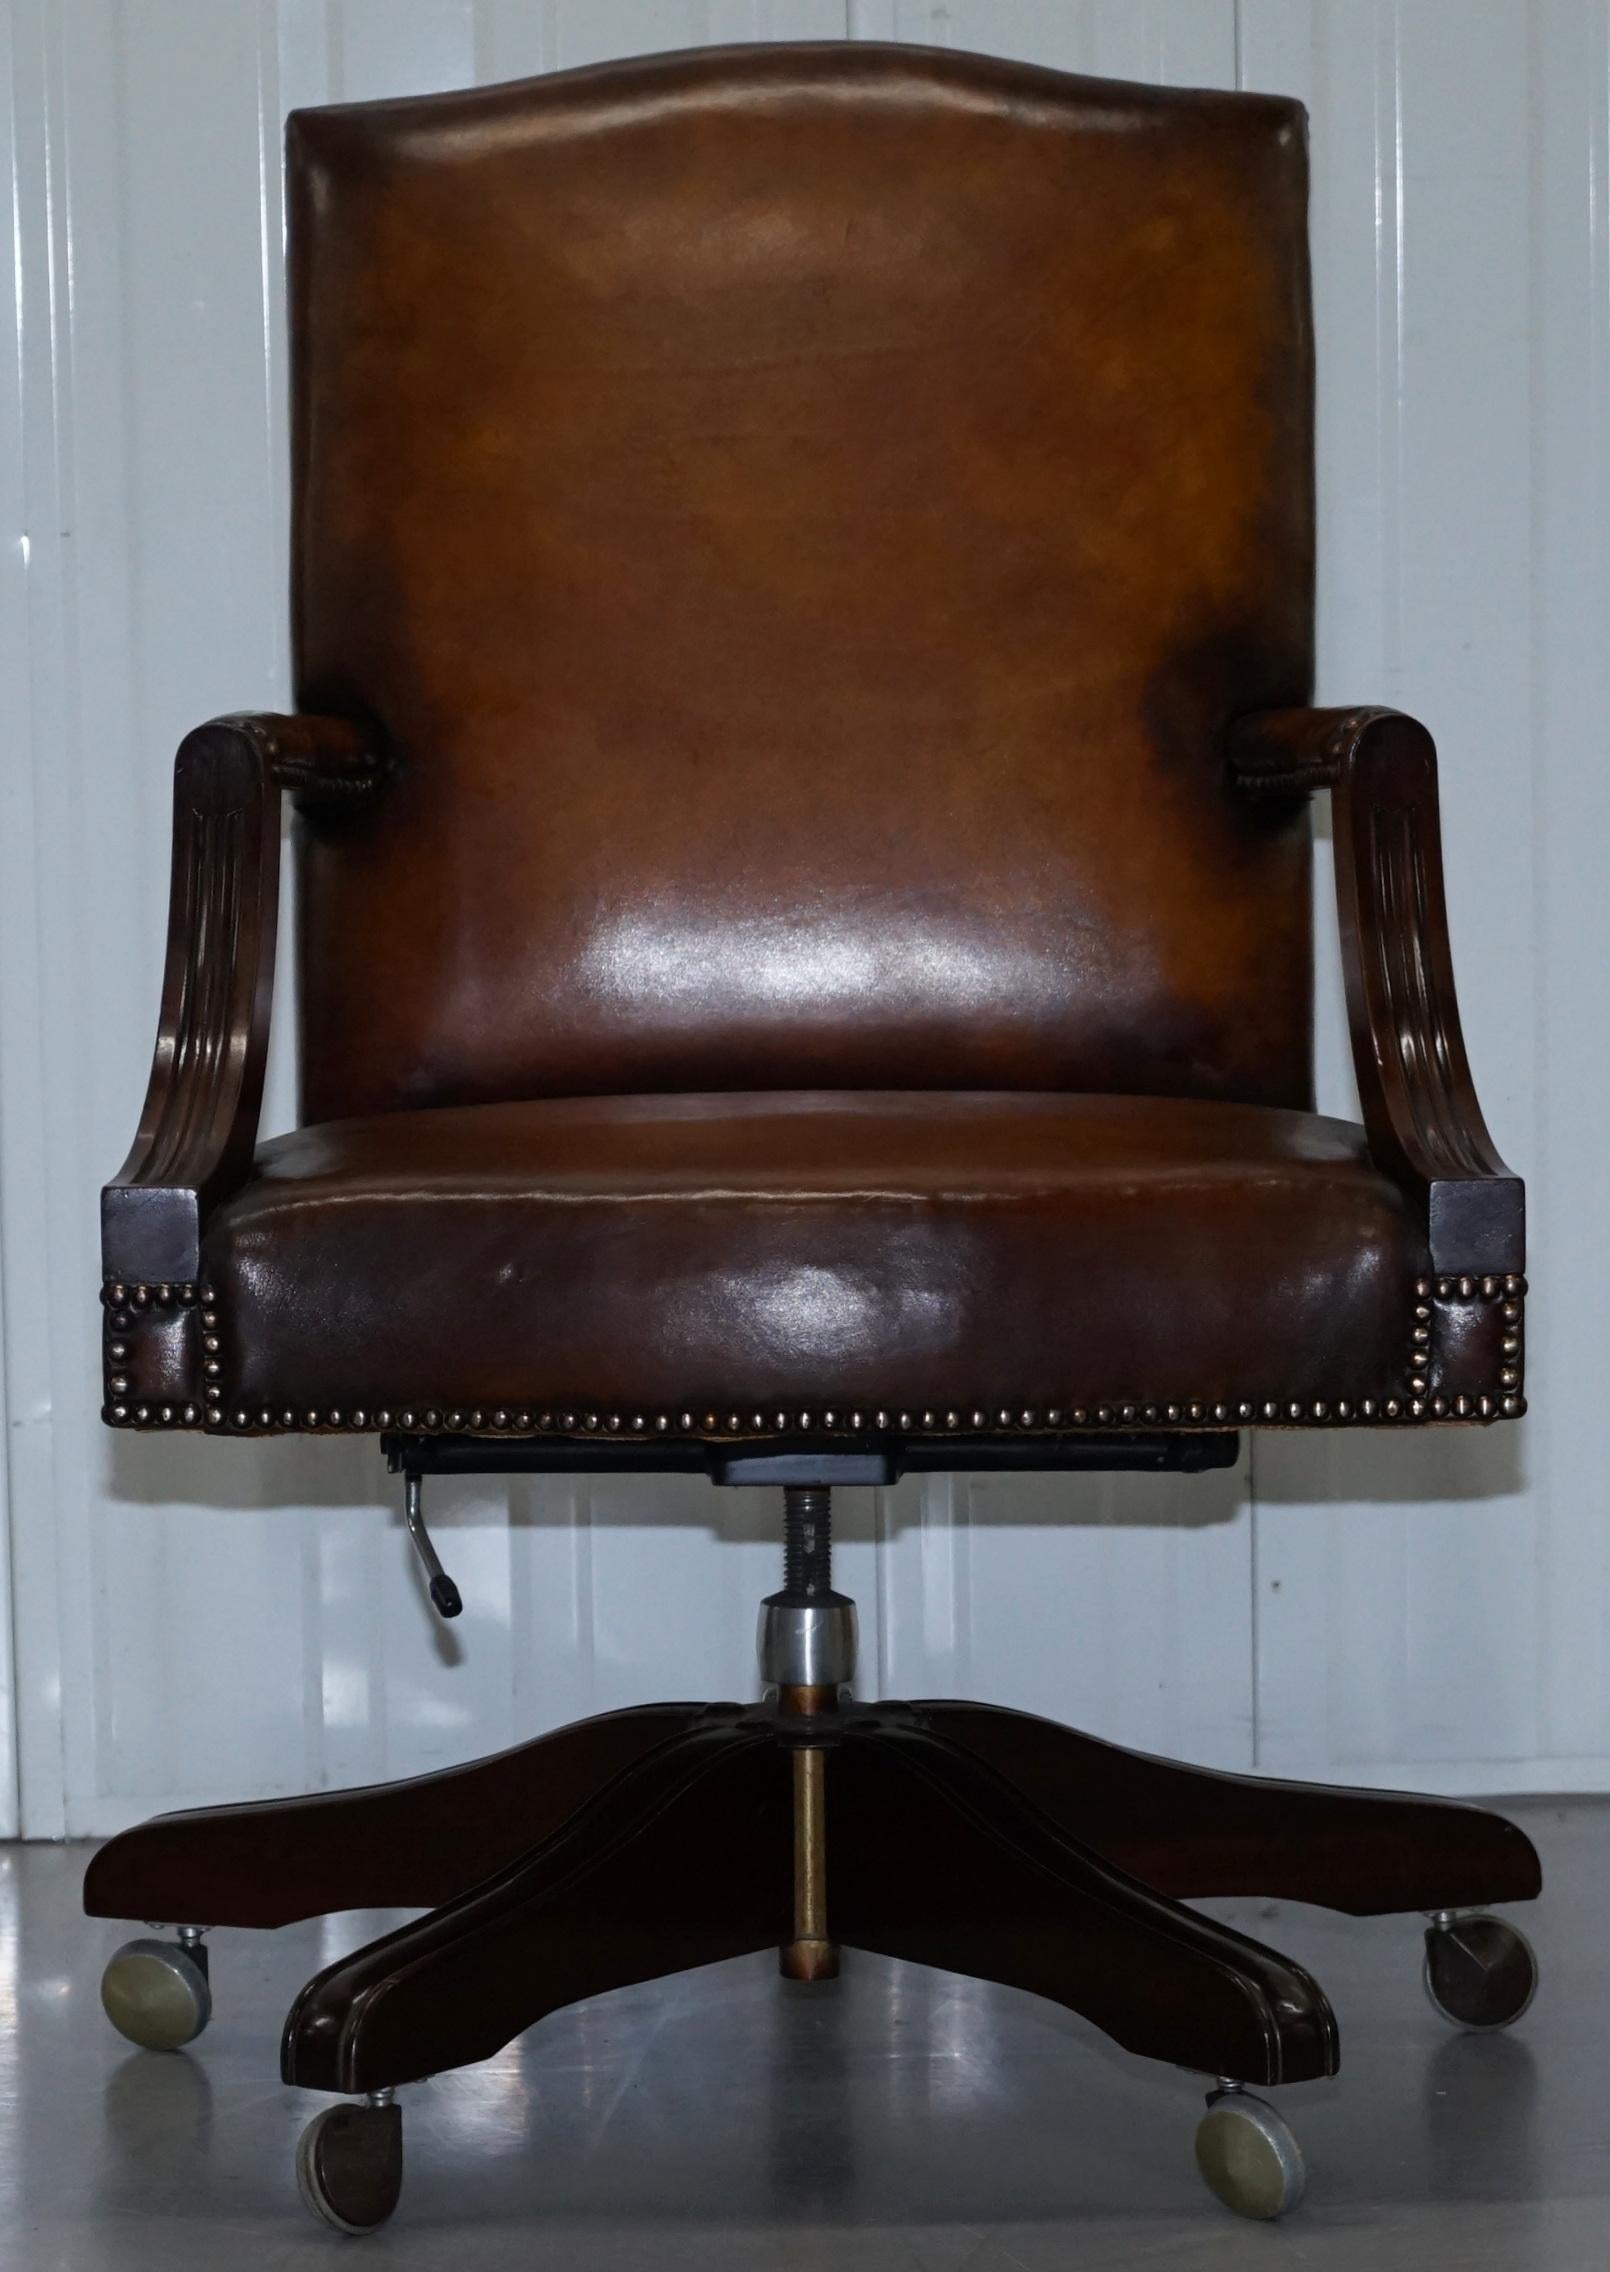 We are delighted to offer for sale this lovely fully restored hand dyed Gainsborough office chair, circa 1960.

A stunning and very comfortable chair, it has been fully restored to include a new leather seat base, the old colour has been stripped